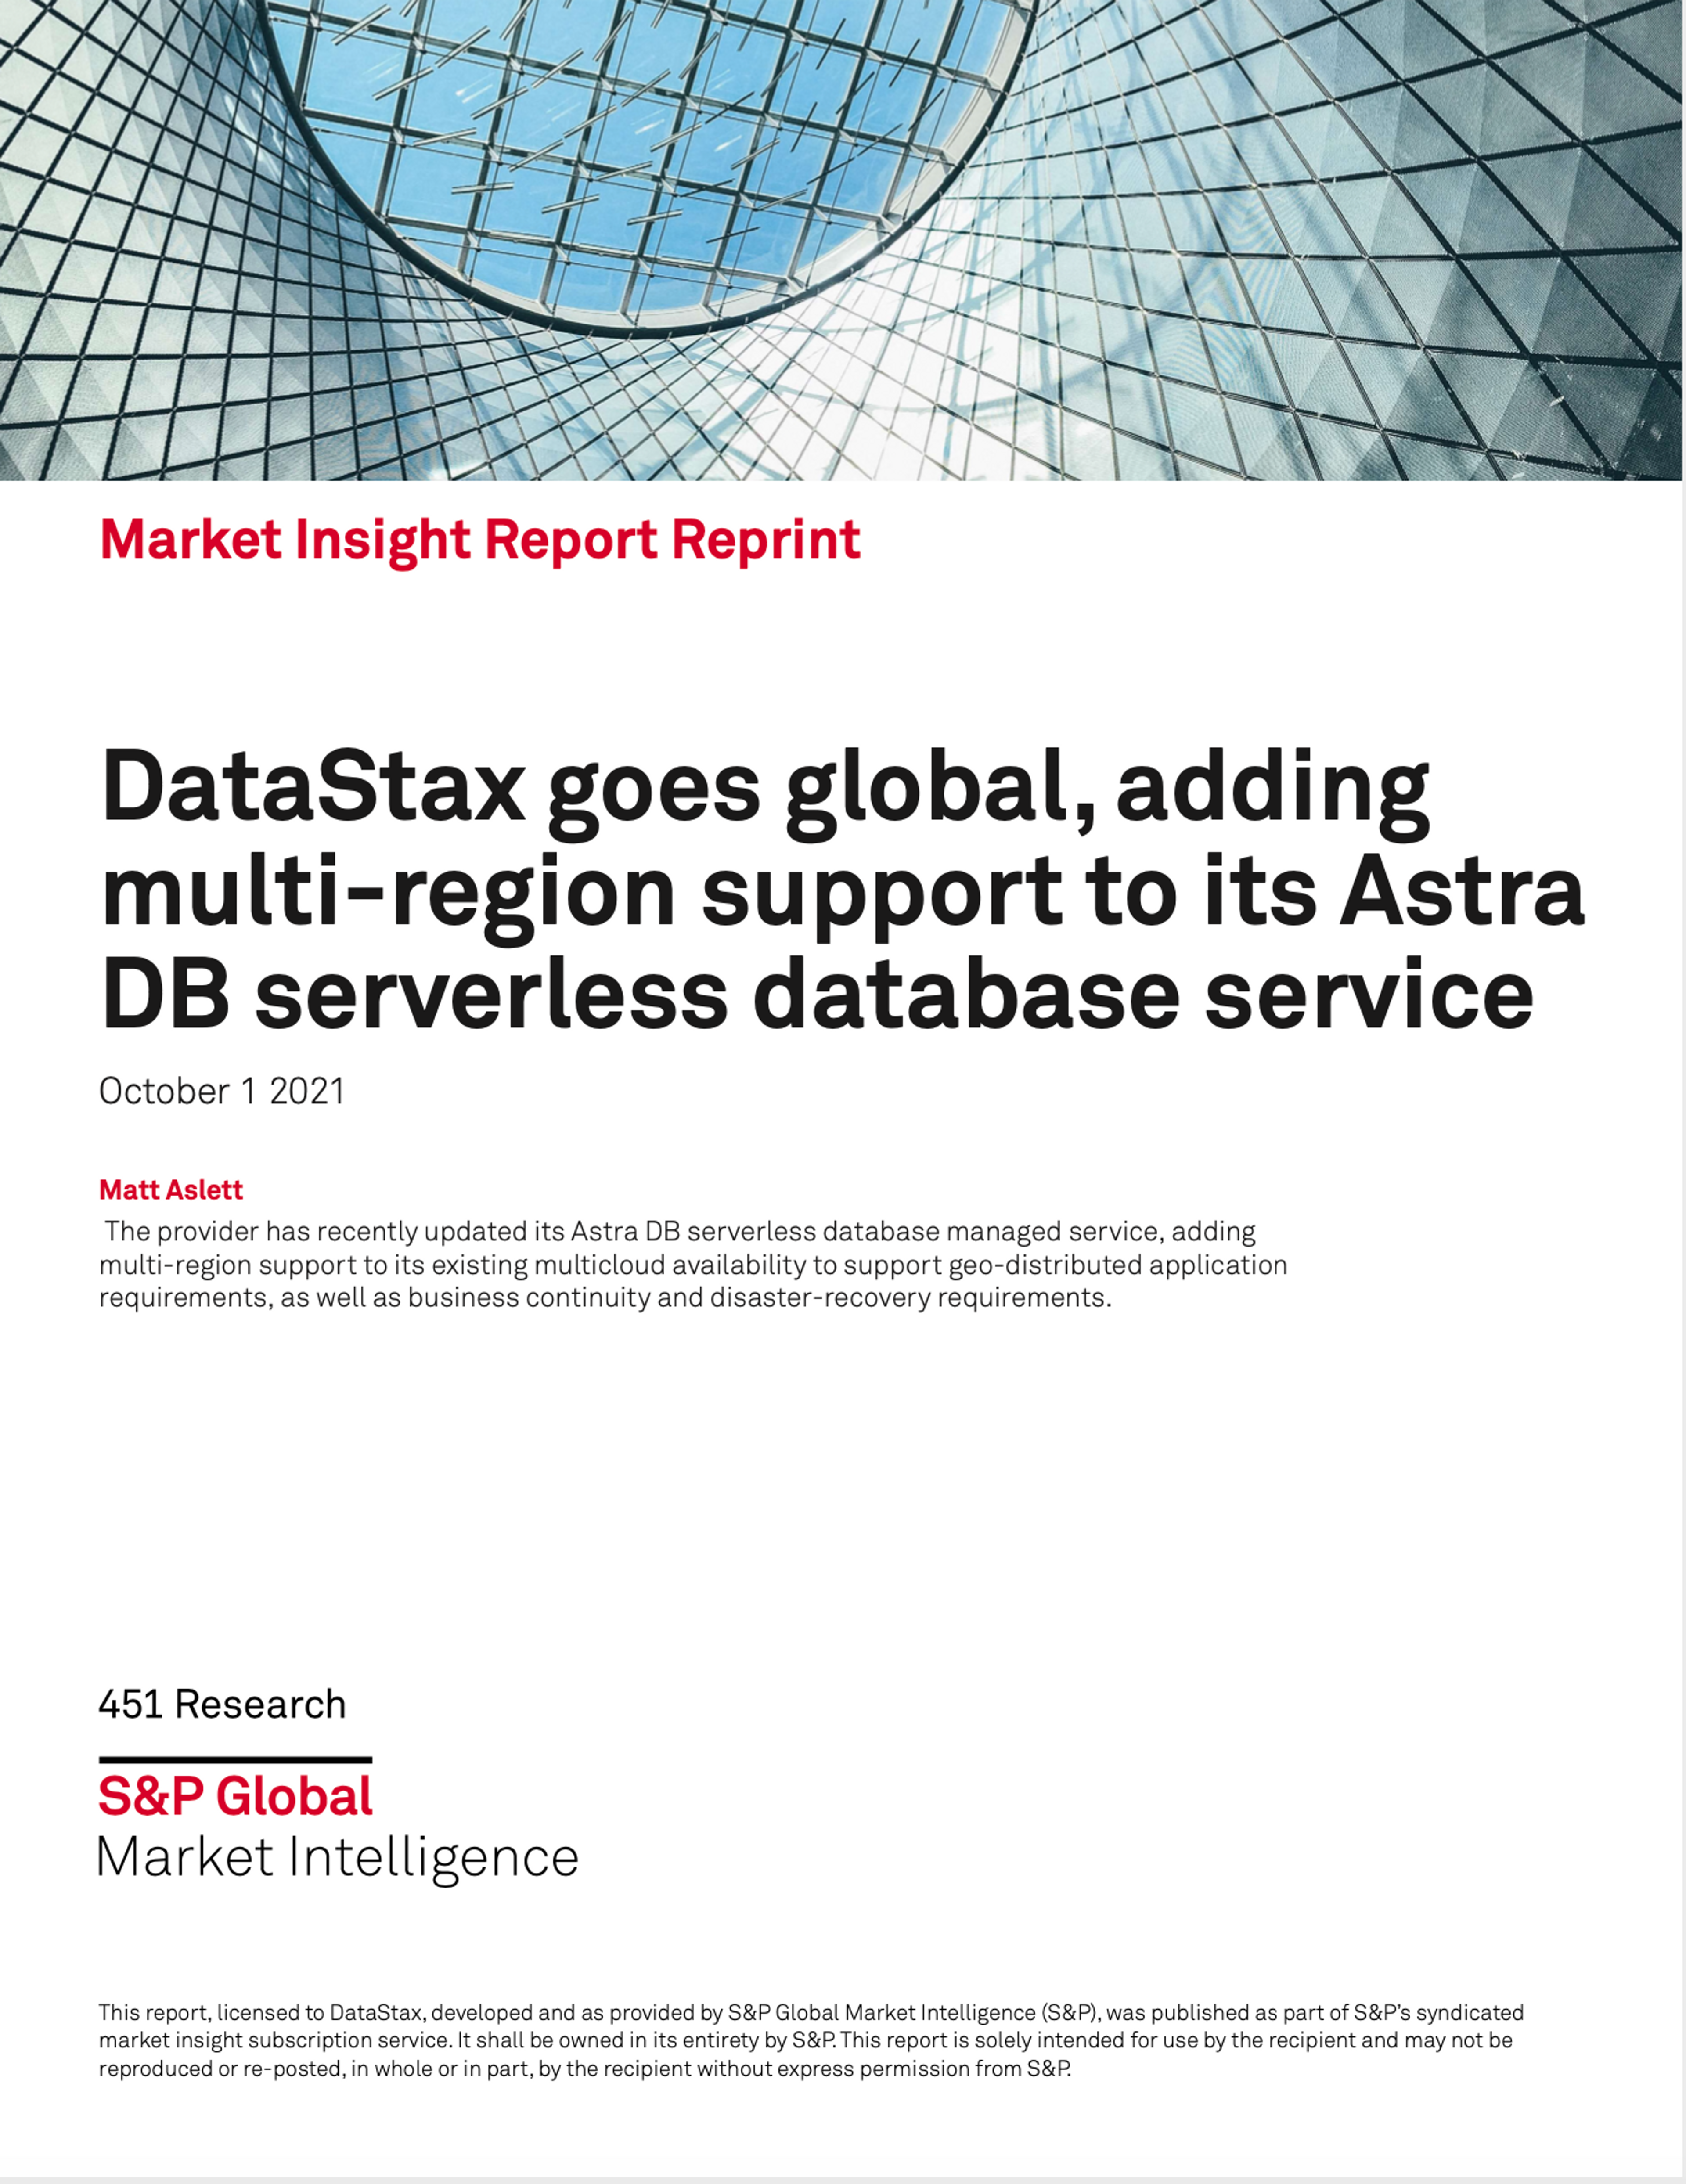 DataStax goes global, adding multi-region support to its Astra DB serverless database service